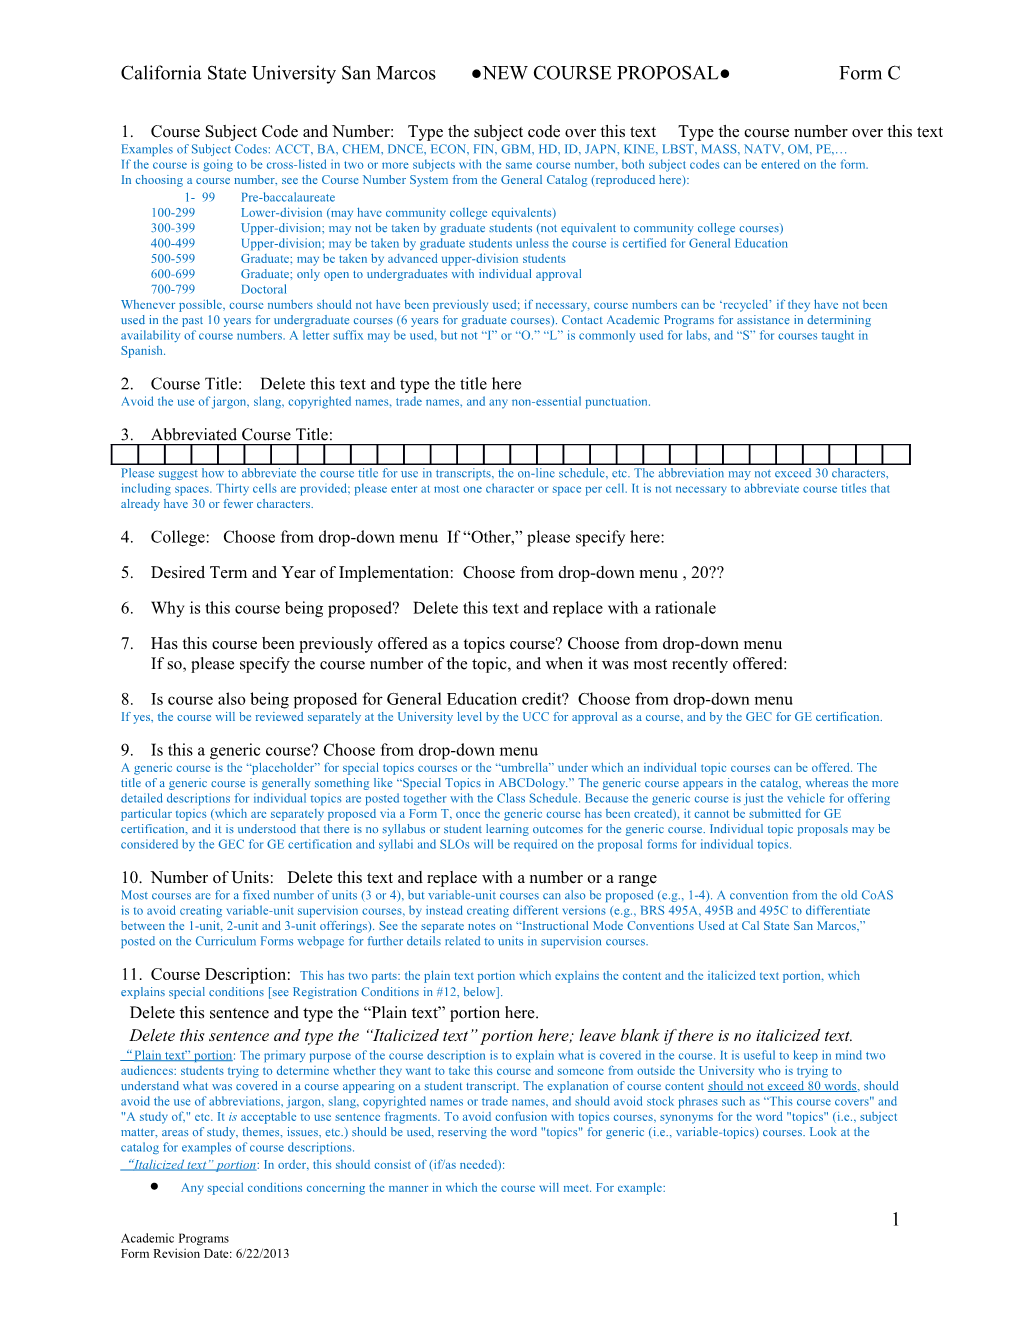 California State University San Marcos NEW COURSE PROPOSAL Form C